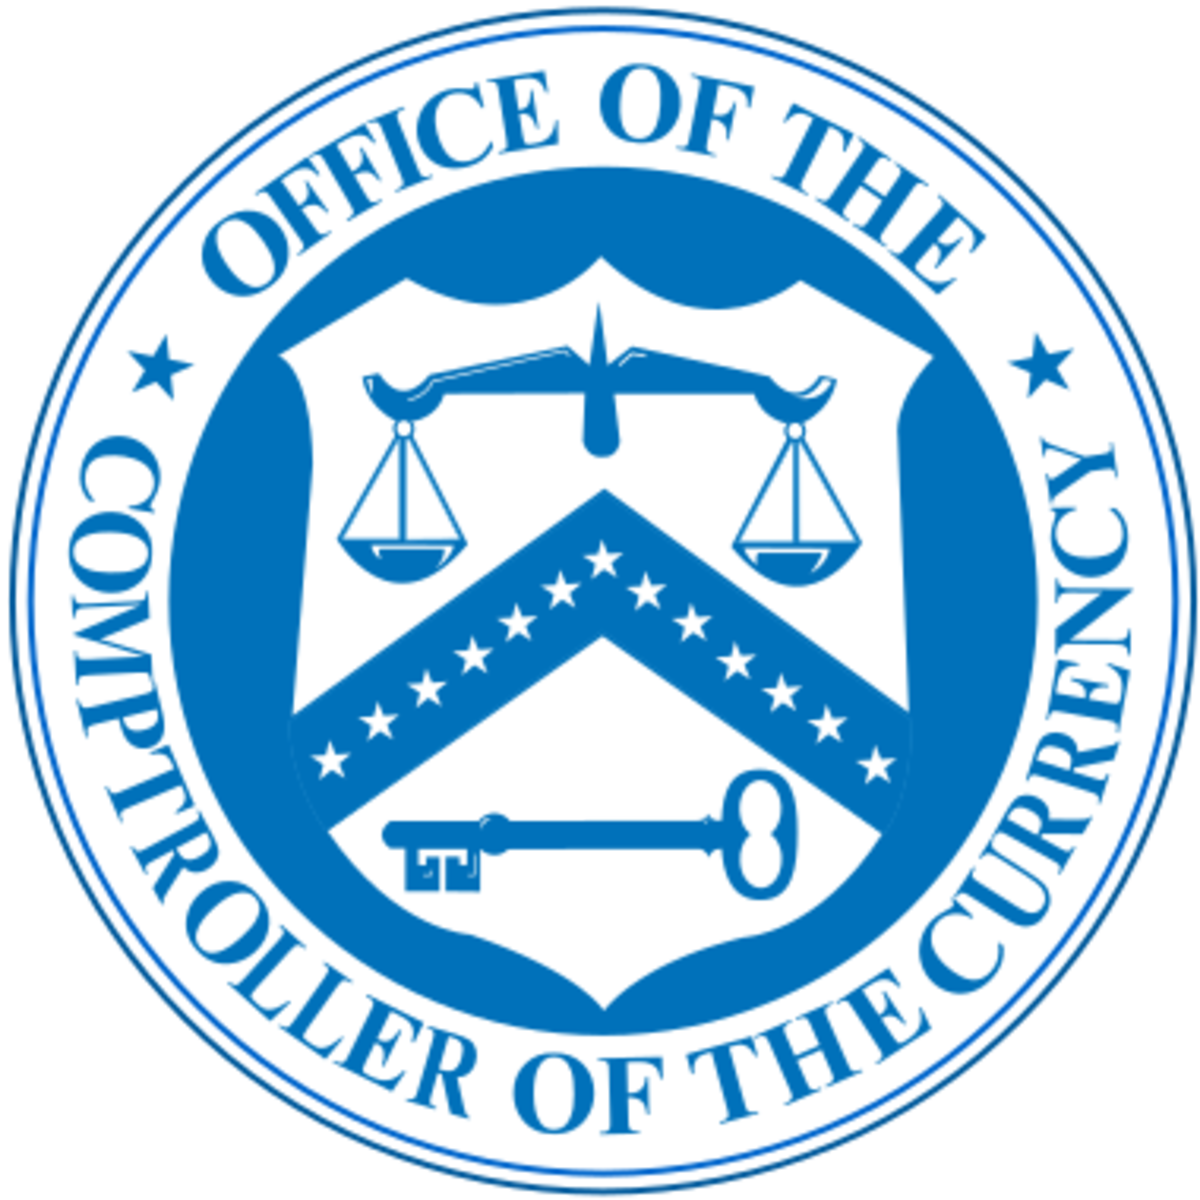 Collection 91+ Images office of the comptroller of the currency logo Updated